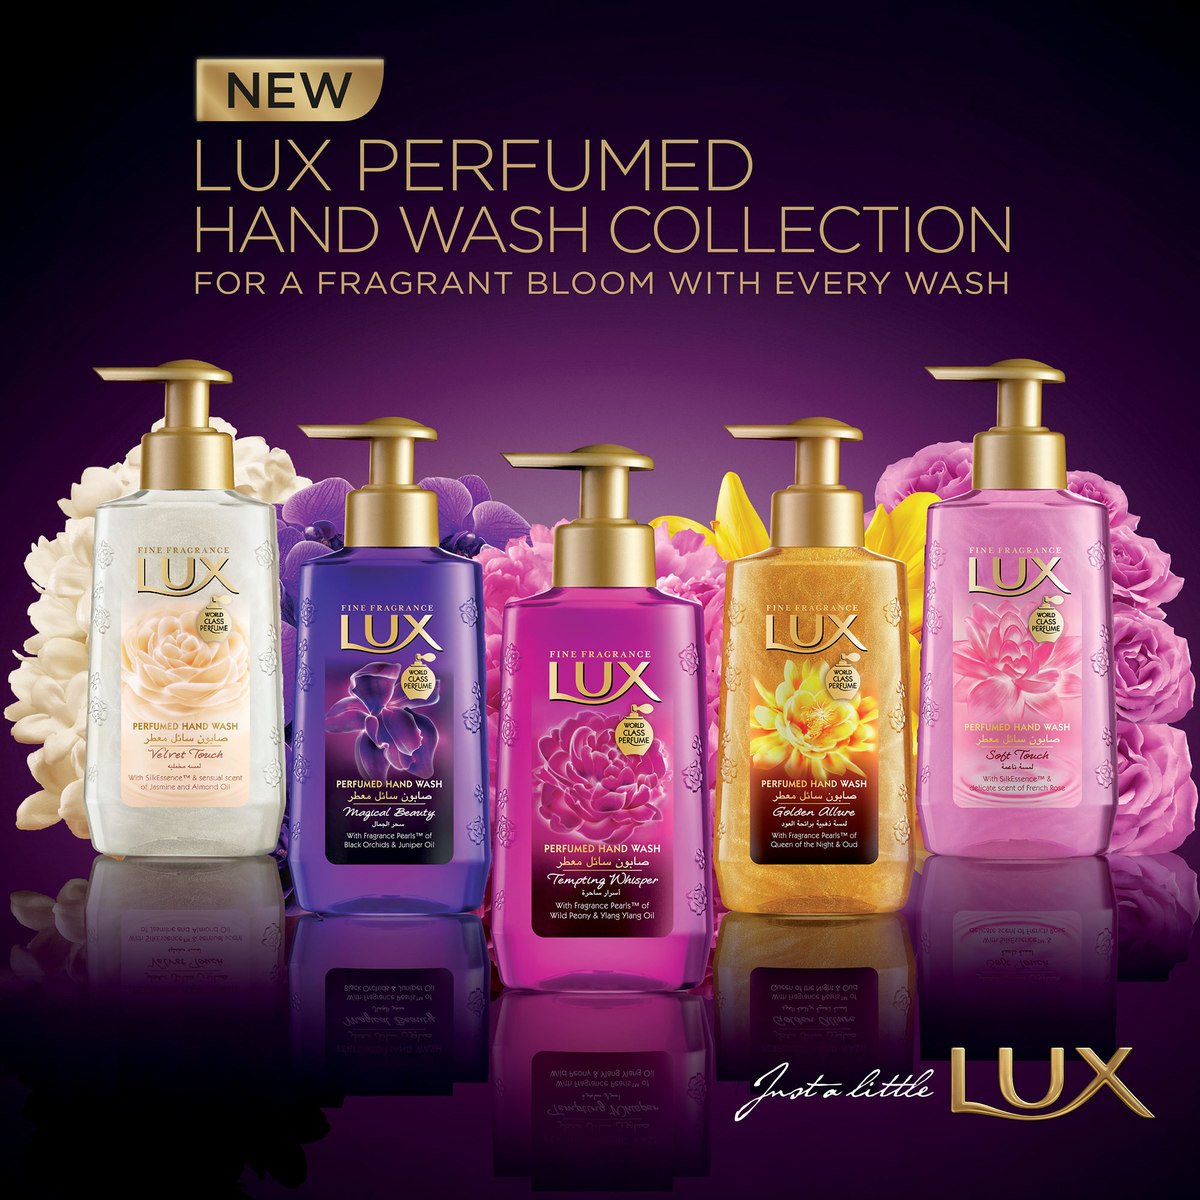 Lux Perfumed Hand Wash Soft Touch, 250 ml